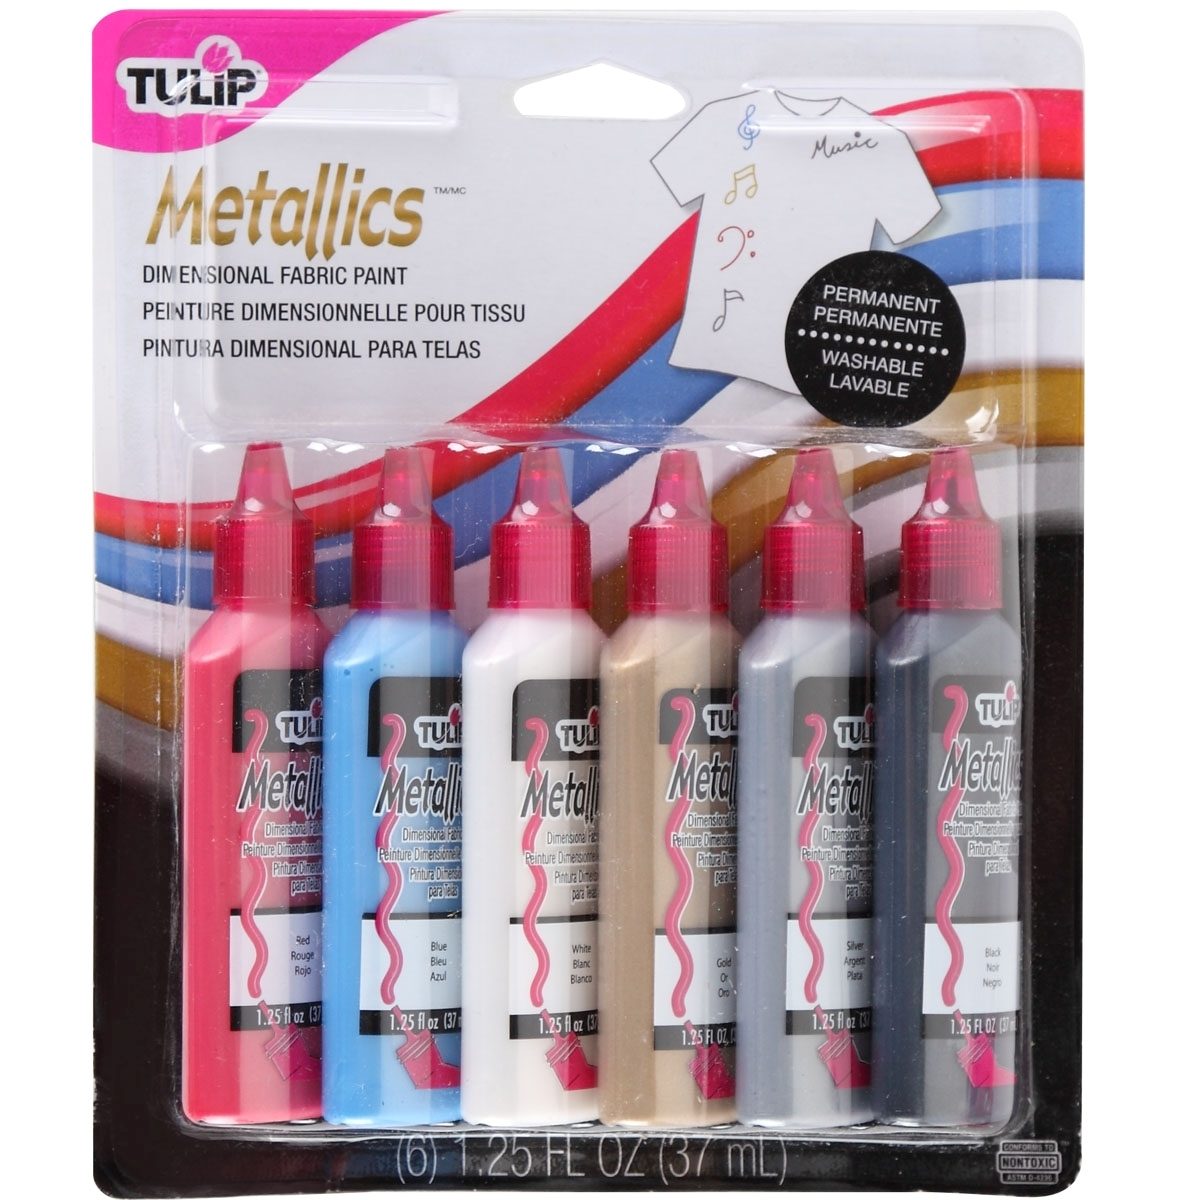 17581 Metallics Dimensional Fabric Paint by Tulip Pack